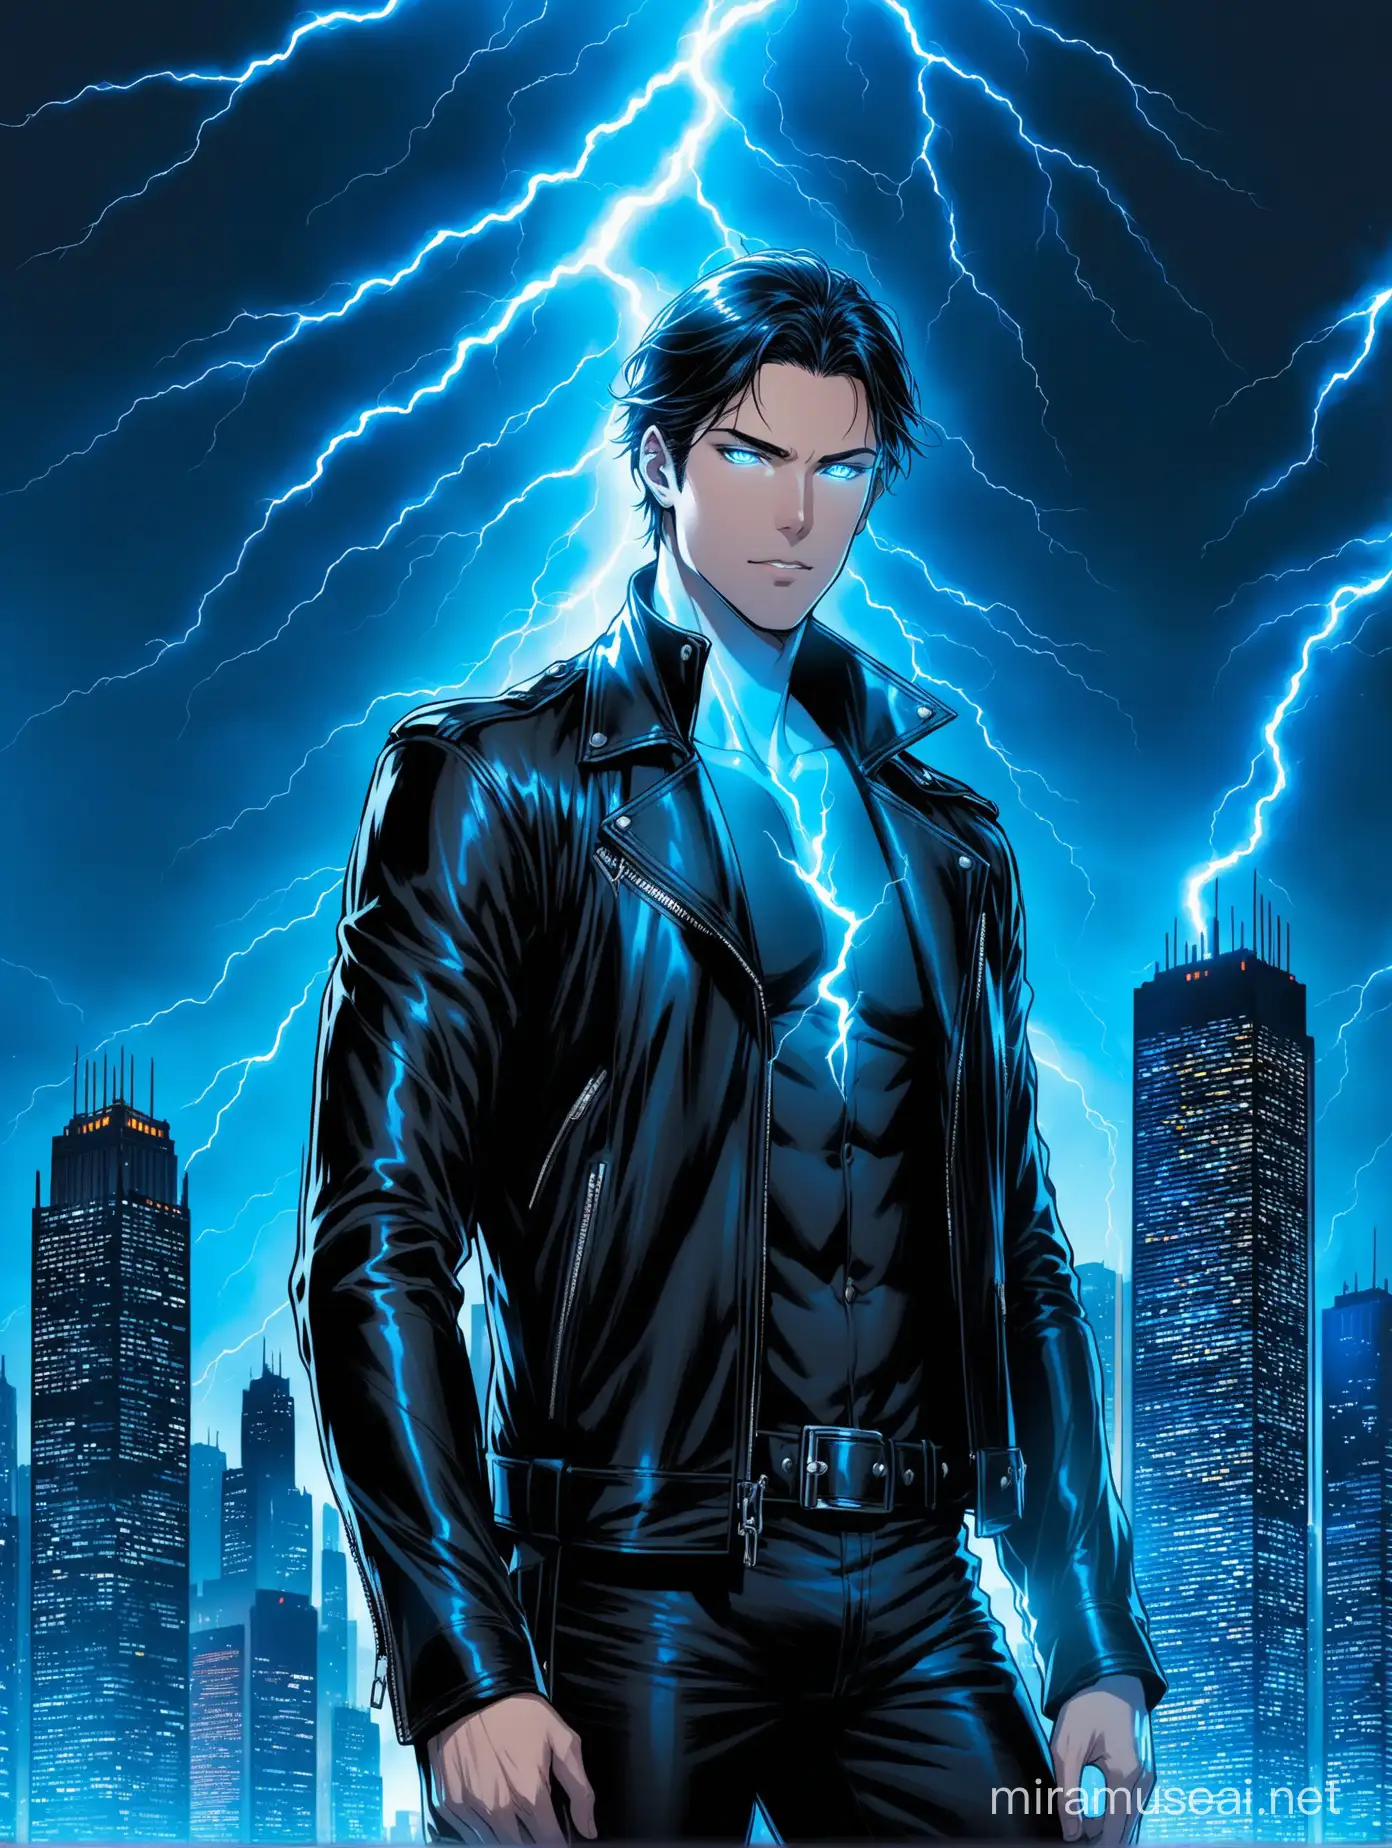 A charming handsome young tall man in black long leather jacket surrounding by blue lightening withbhis eyes glowing blue, and a skyscraper behind him